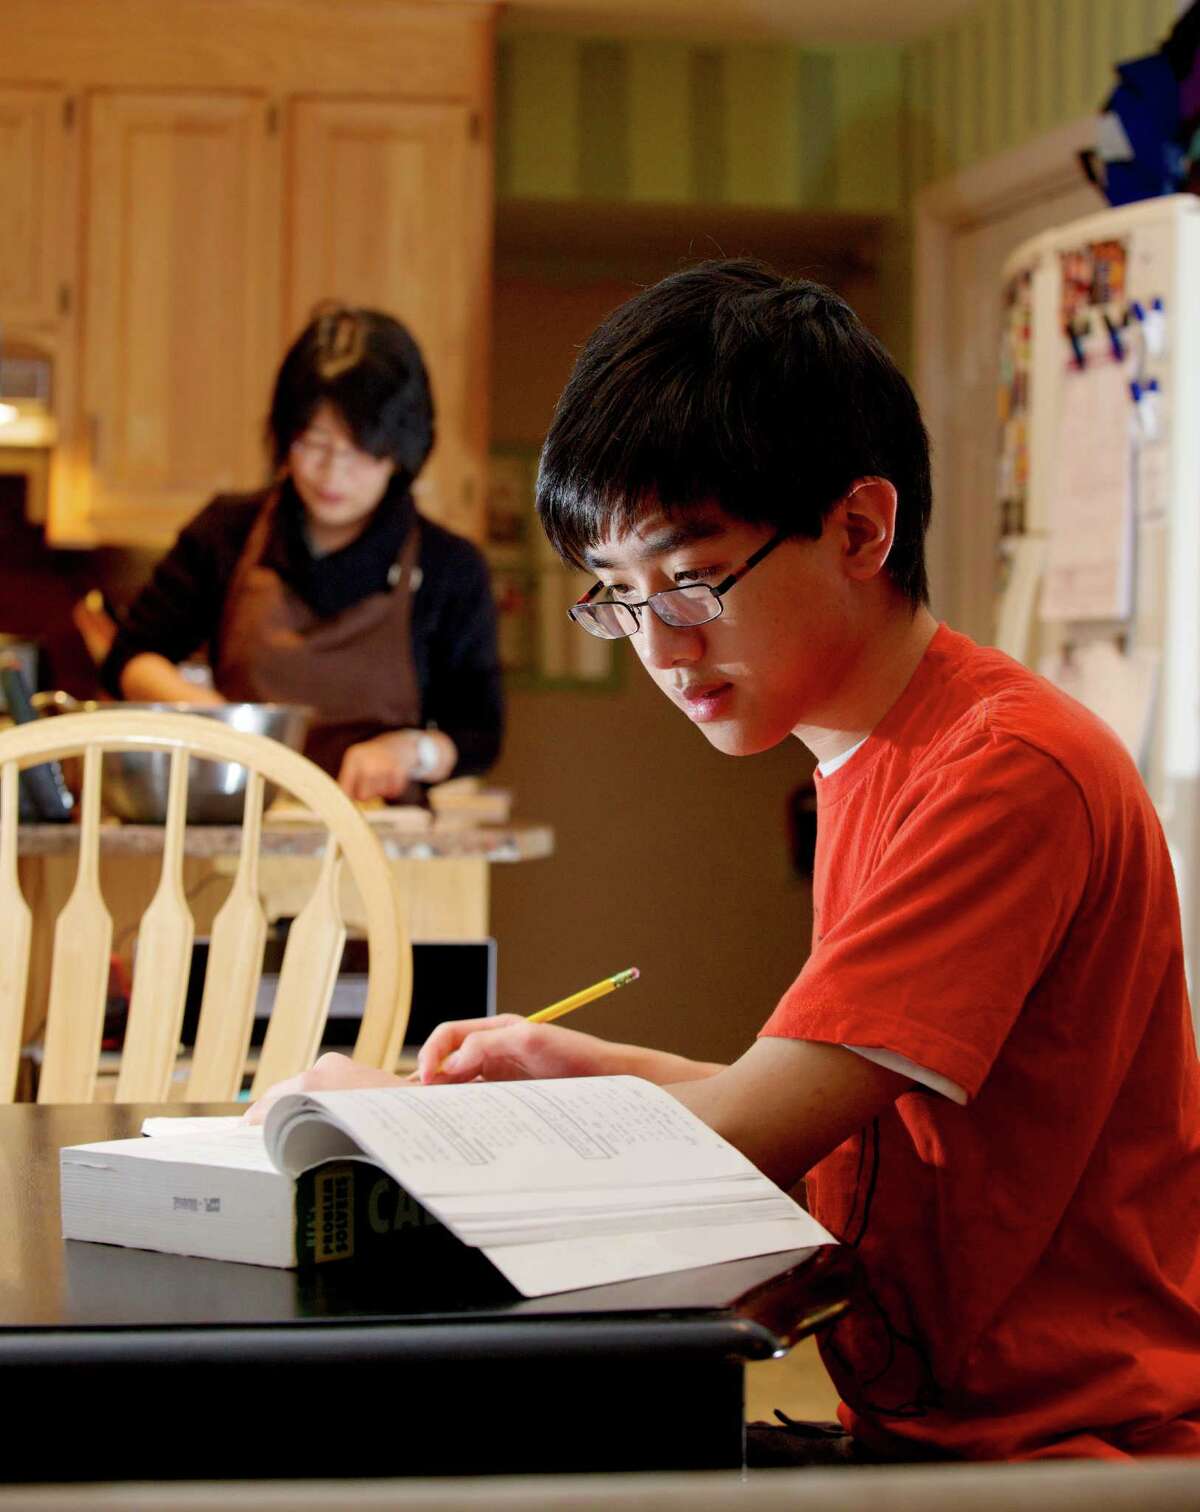 Howard Ho, 18, works on his calculus while his mother Sandy Ho prepares dinner in their New Milford, Conn, home. Ho is home schooled and has been applying to colleges for the fall. He has already started taking classes at Western Connecticut State University. Tuesday, January 14, 2014.